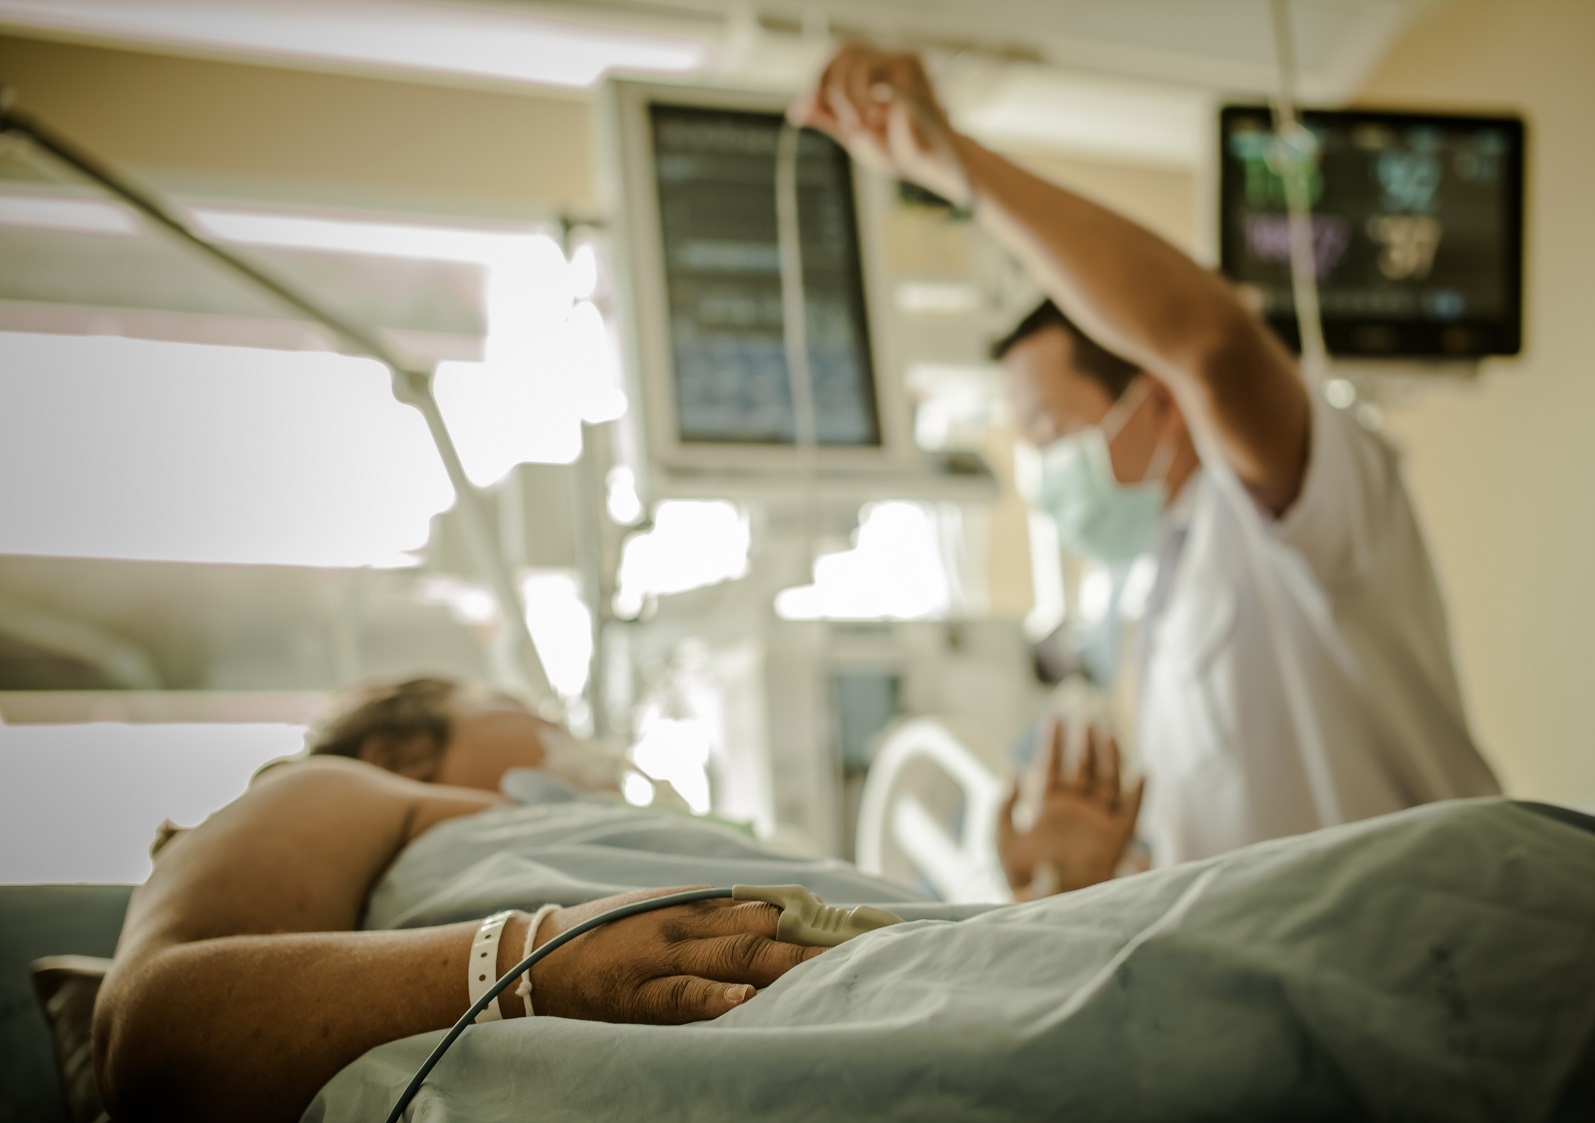 Hospitals should follow three simple steps to better care for patients and avoid litigation. Photo: Shutterstock